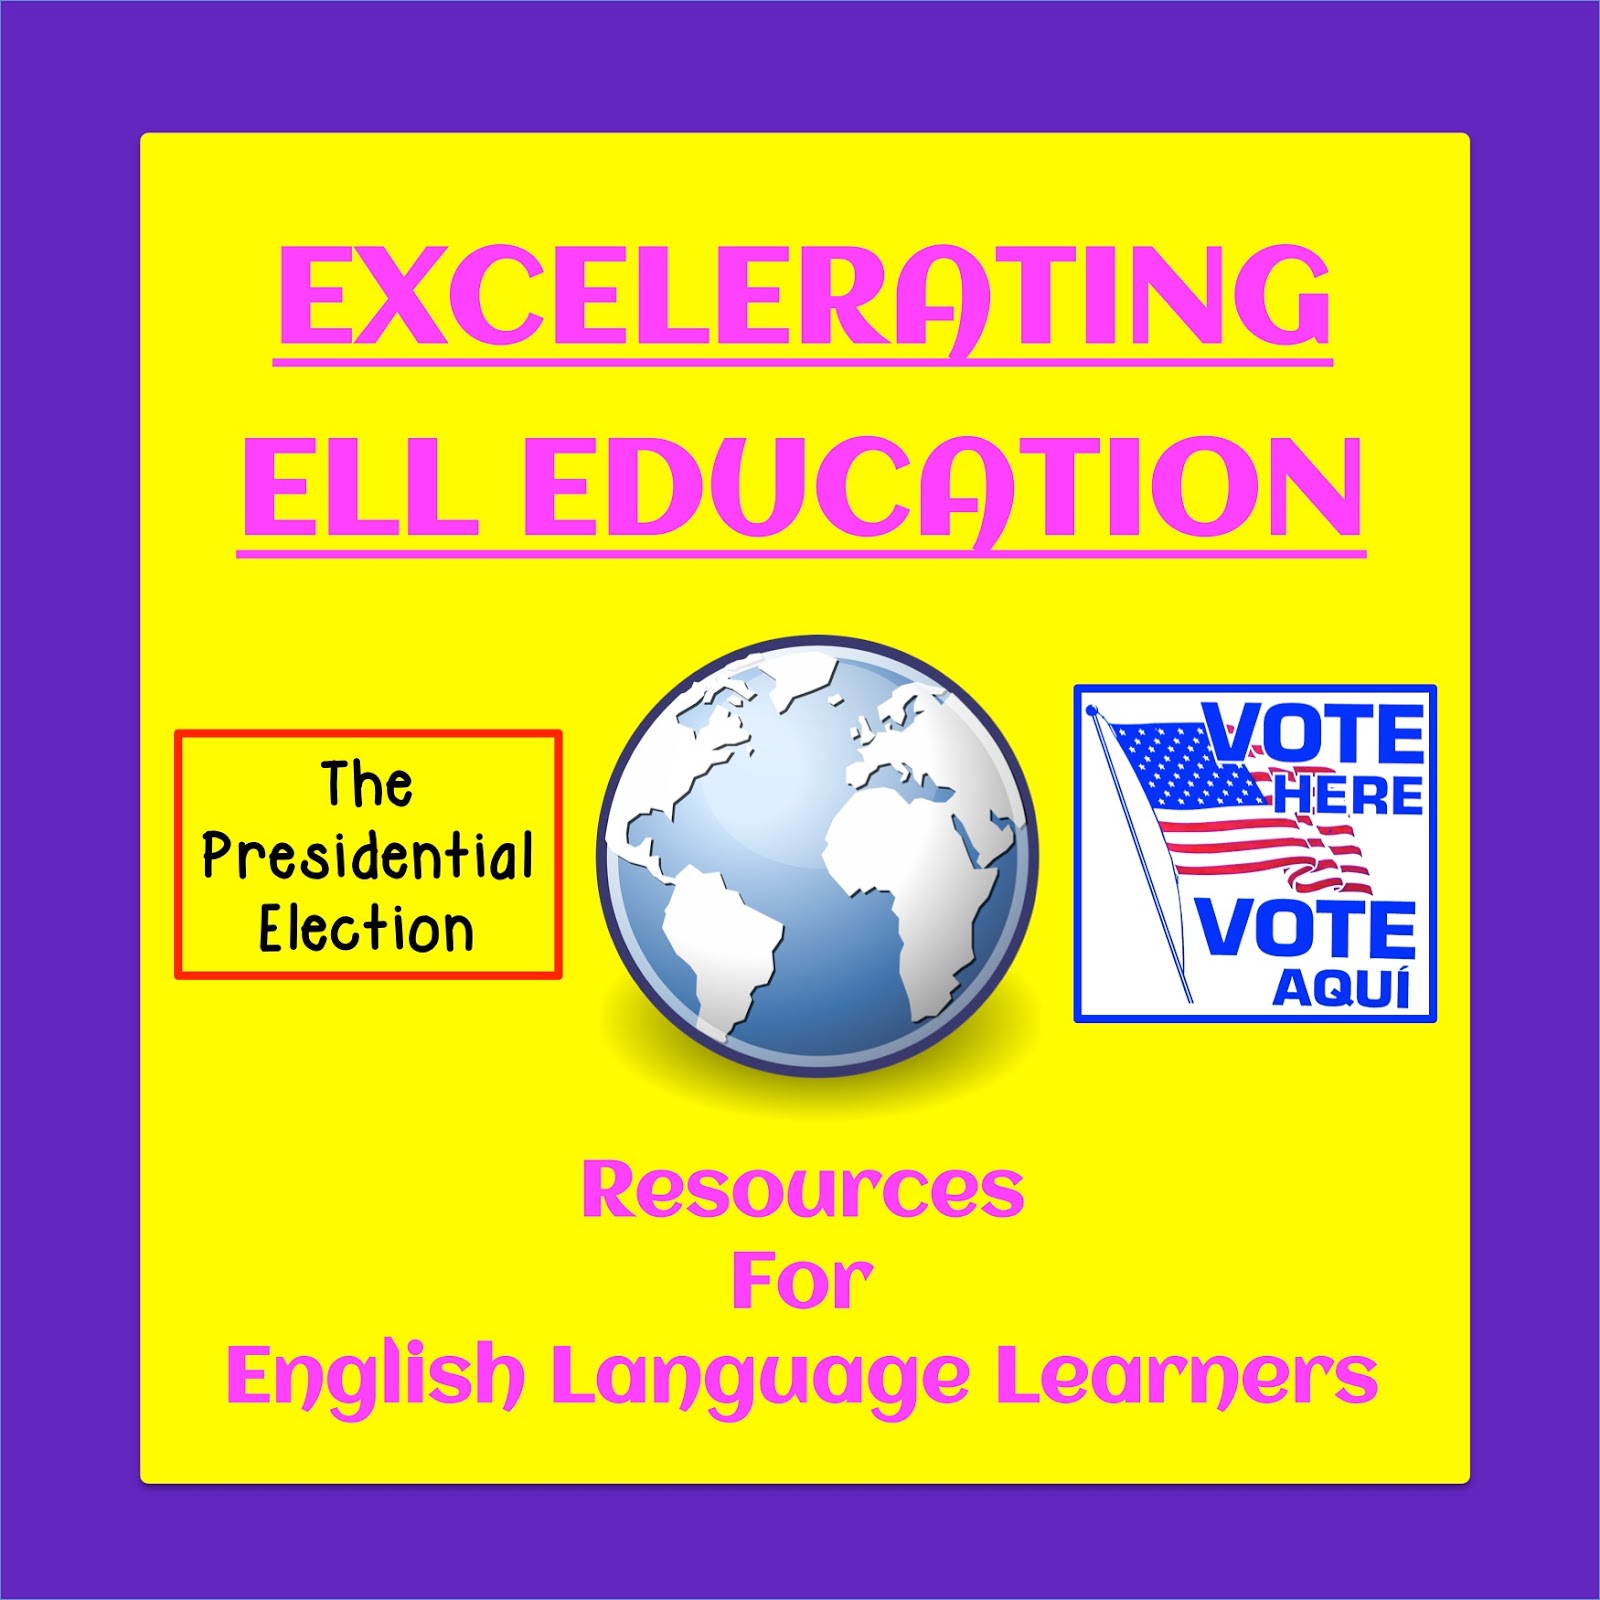 Find links to websites that teach about the presidential election & more resources in this month's Excelerating ELL linky party | The ESL Connection